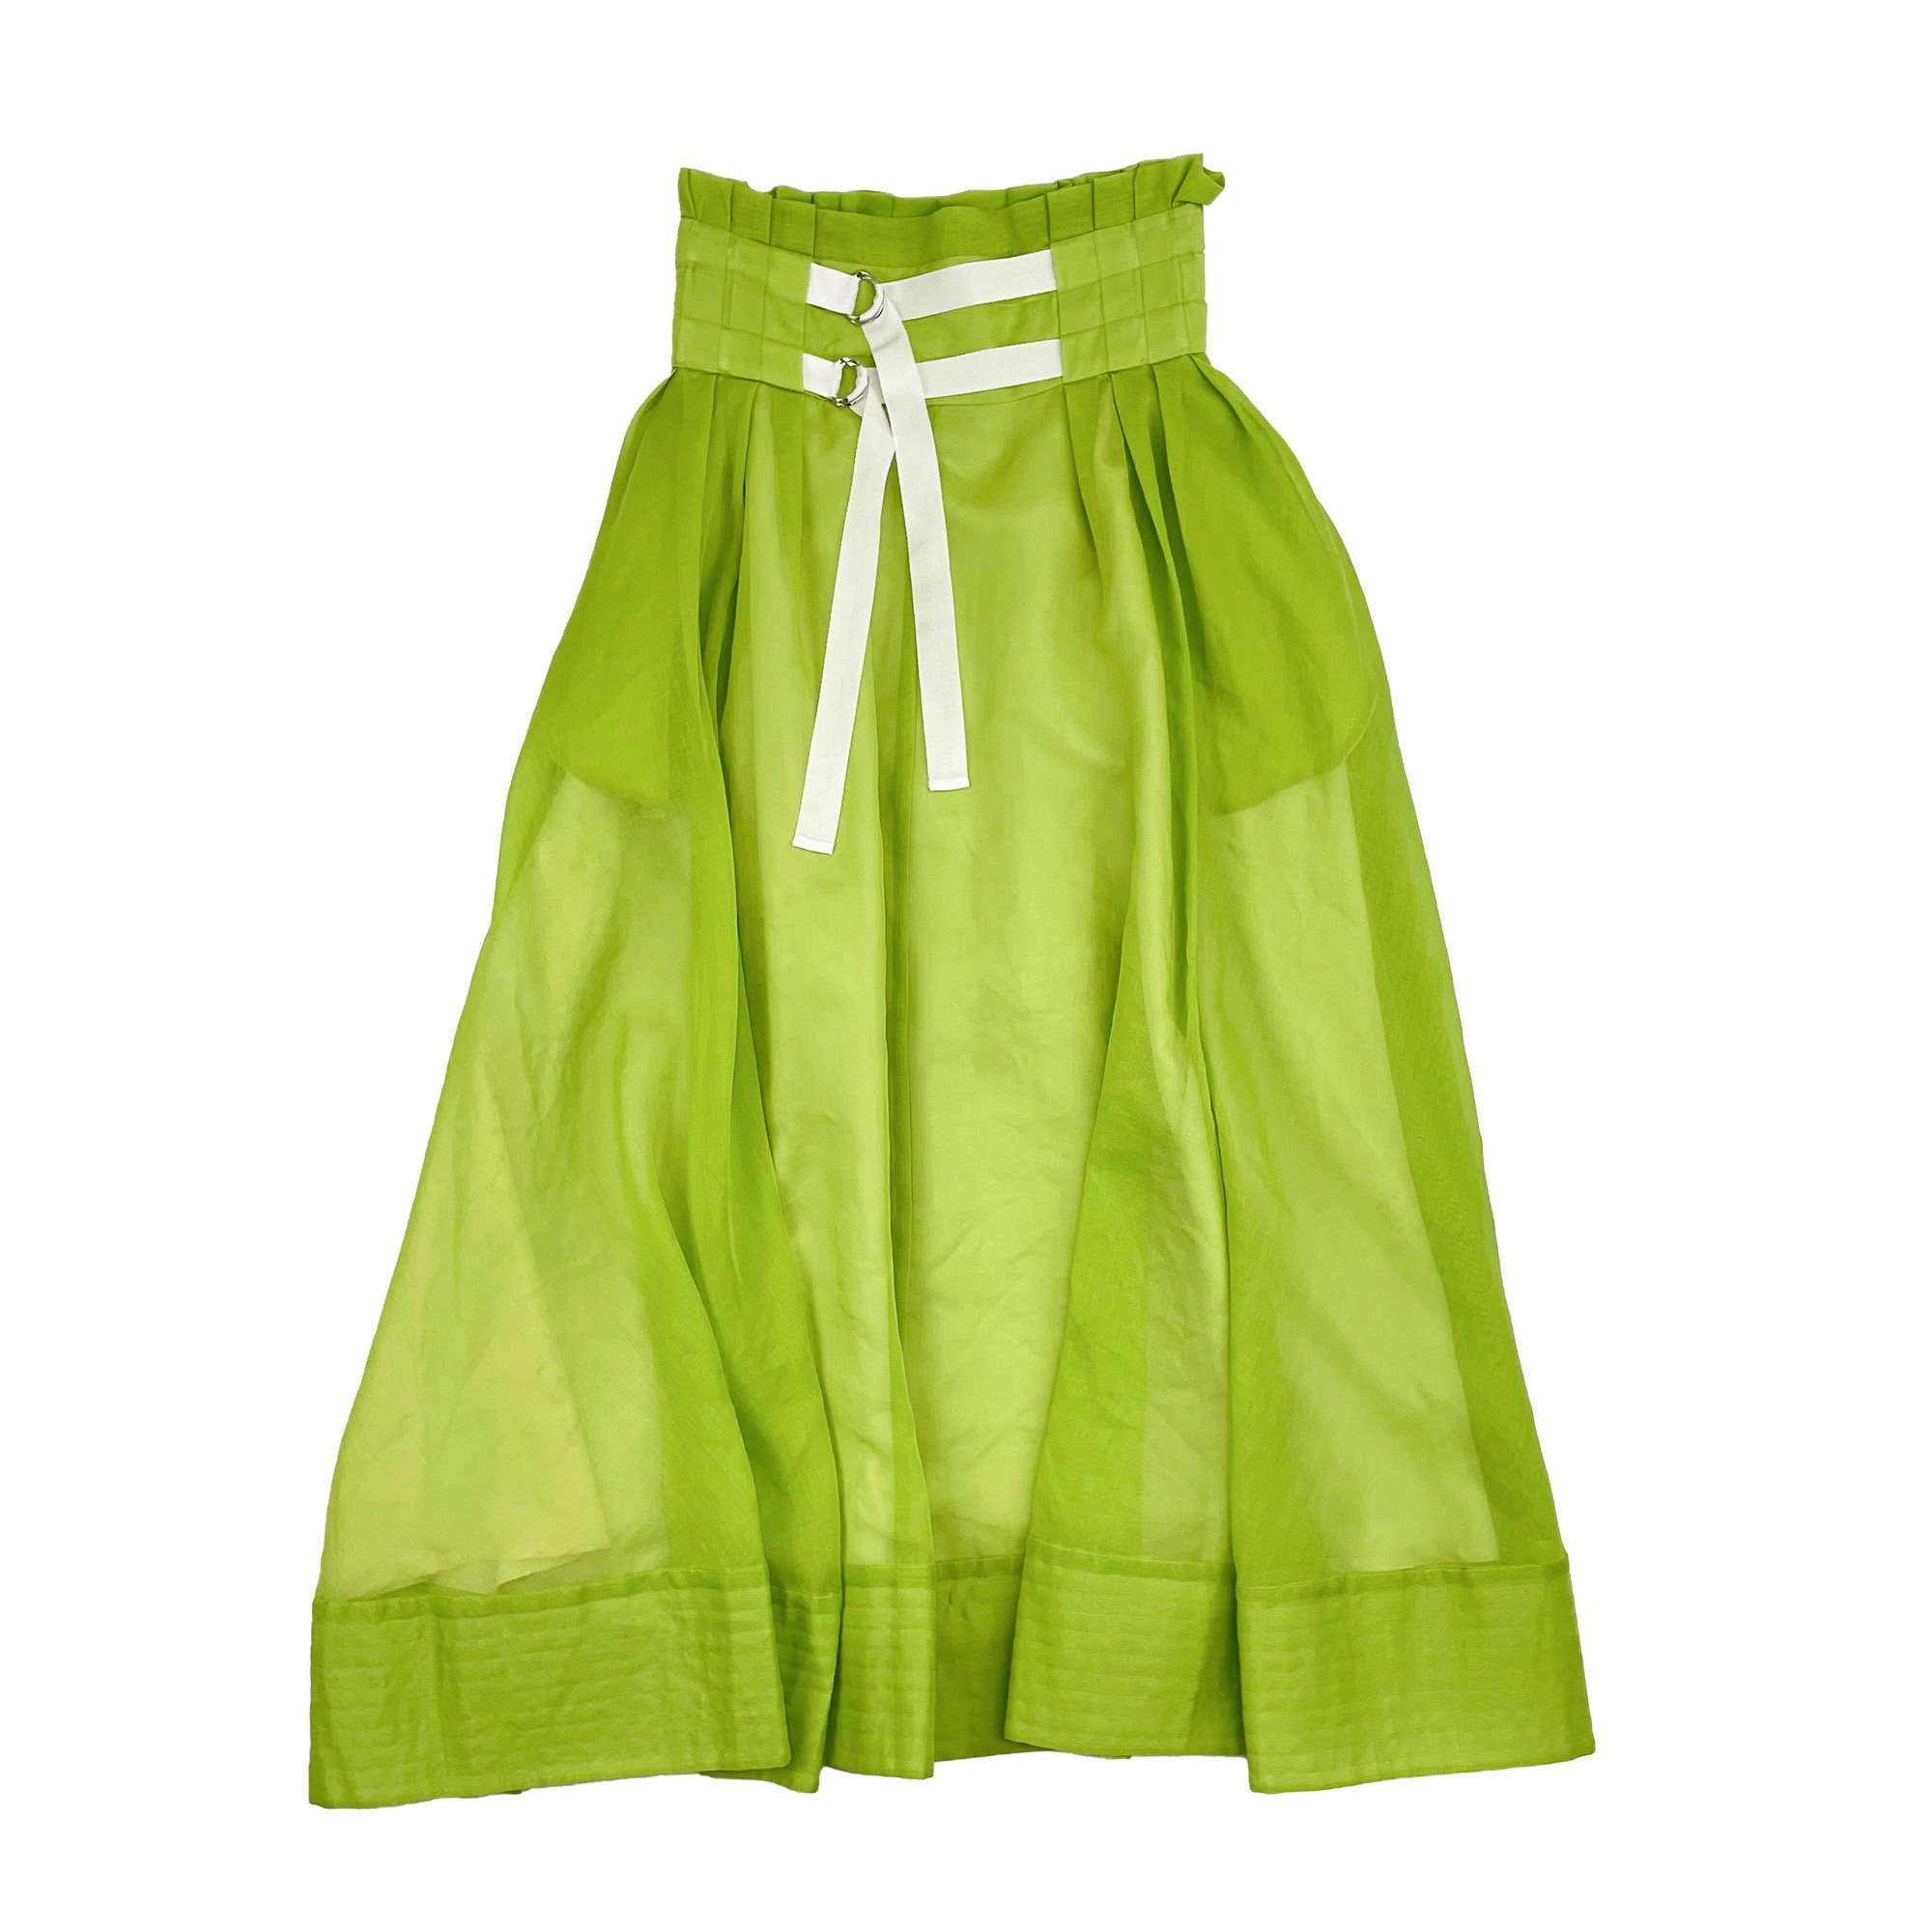 <img class='new_mark_img1' src='https://img.shop-pro.jp/img/new/icons7.gif' style='border:none;display:inline;margin:0px;padding:0px;width:auto;' />STUMBLY SHEER ORGANDY SKIRT